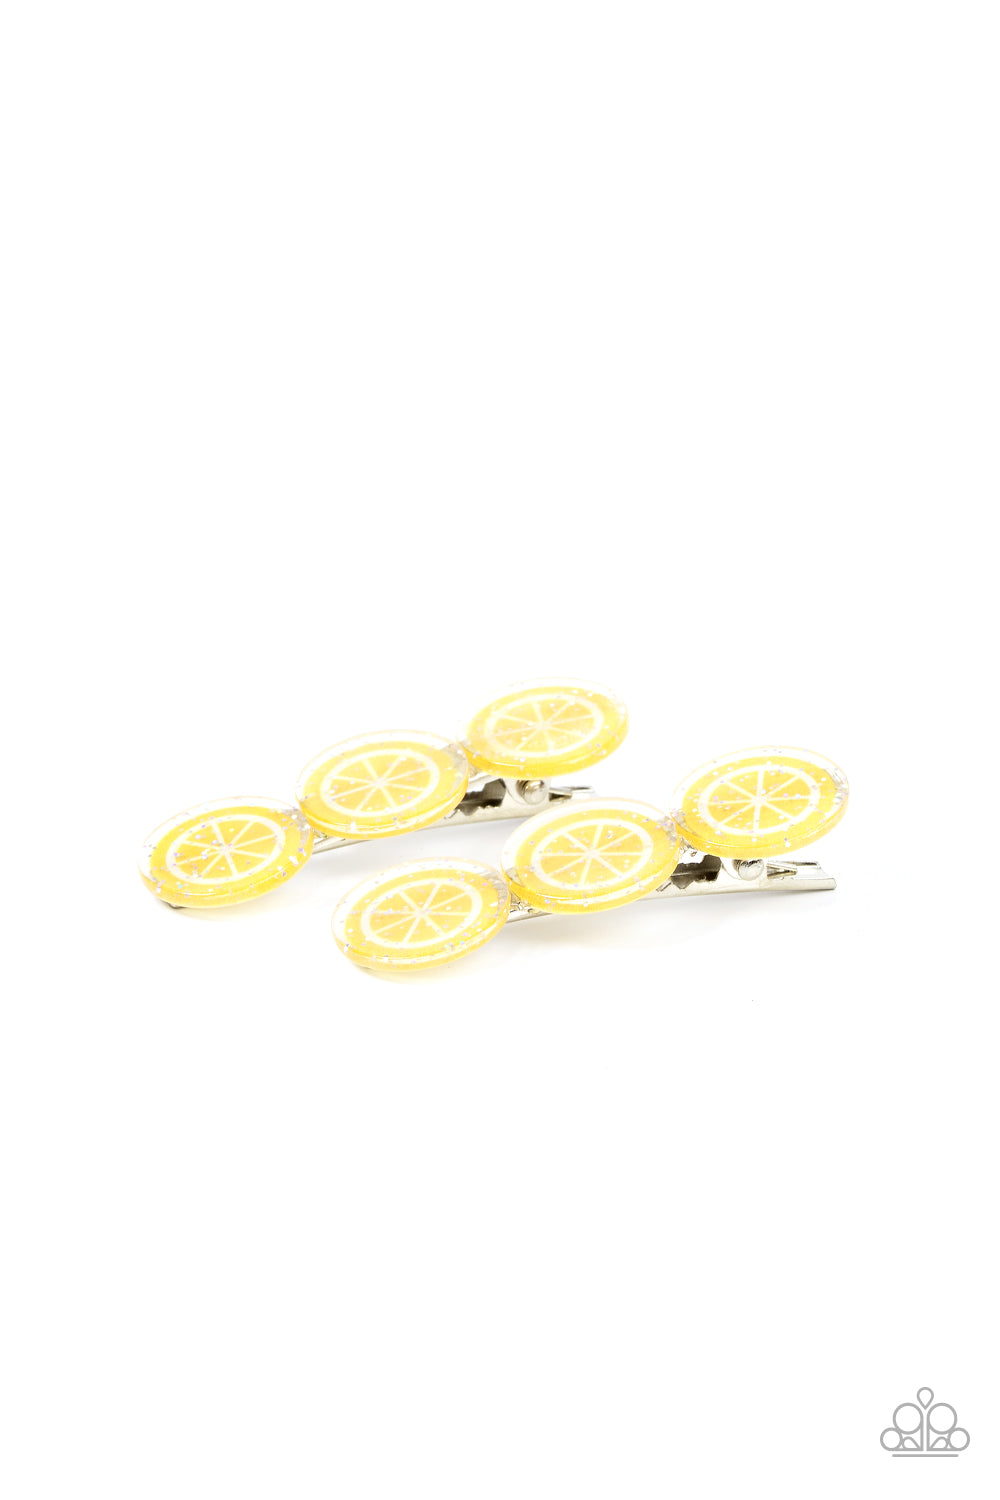 Charismatically Citrus - Yellow Hair Accessory Paparazzi Accessories